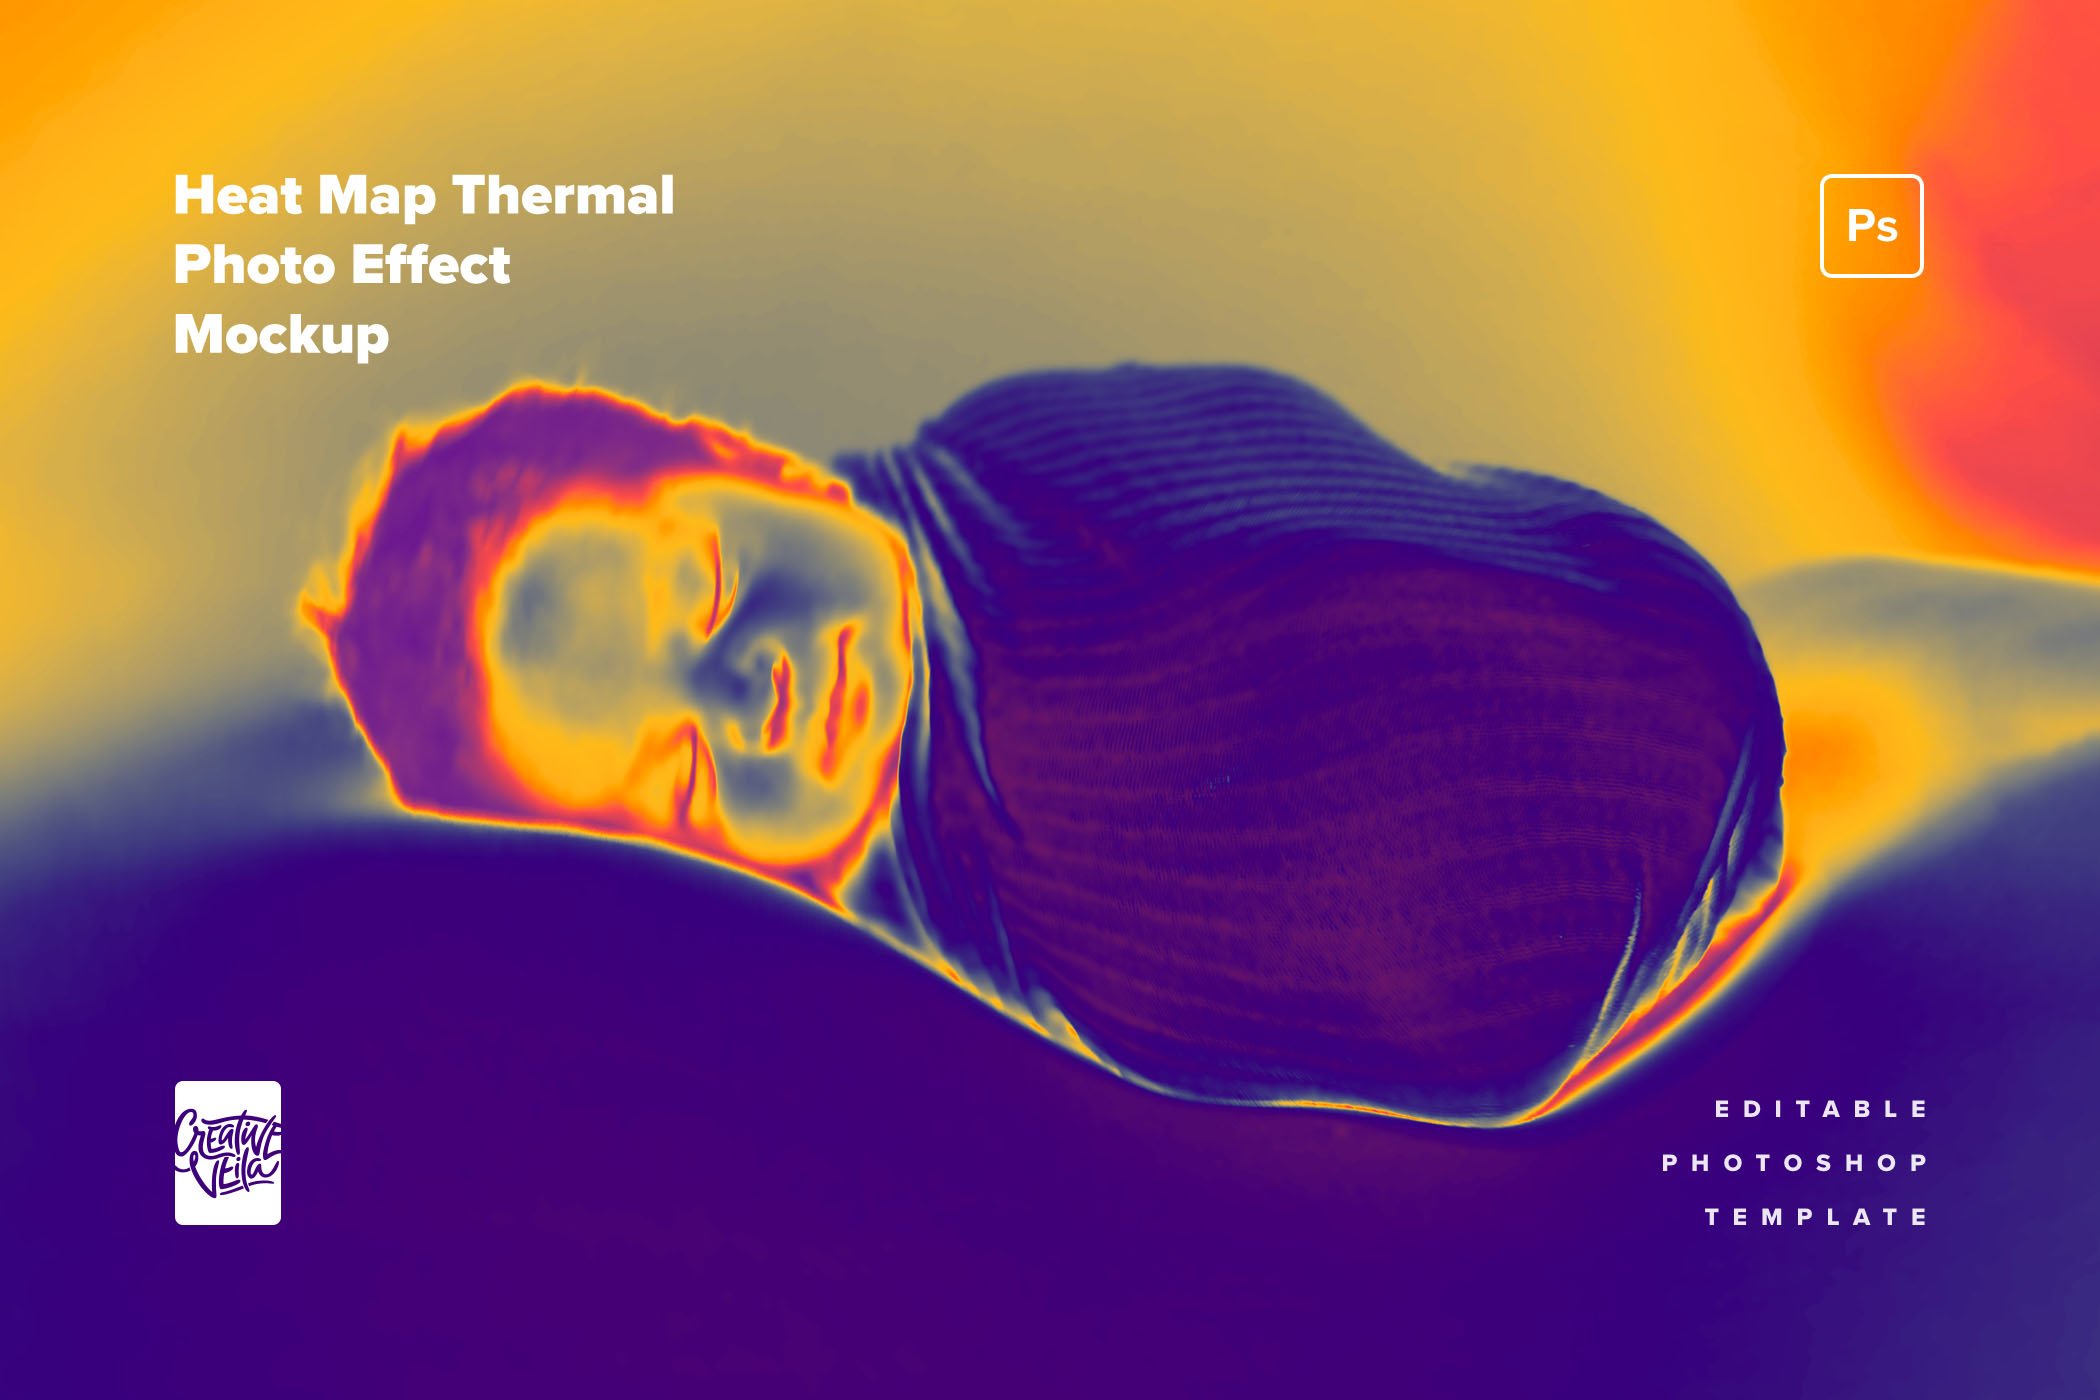 heat map thermal photo effect by creative veila 06 880